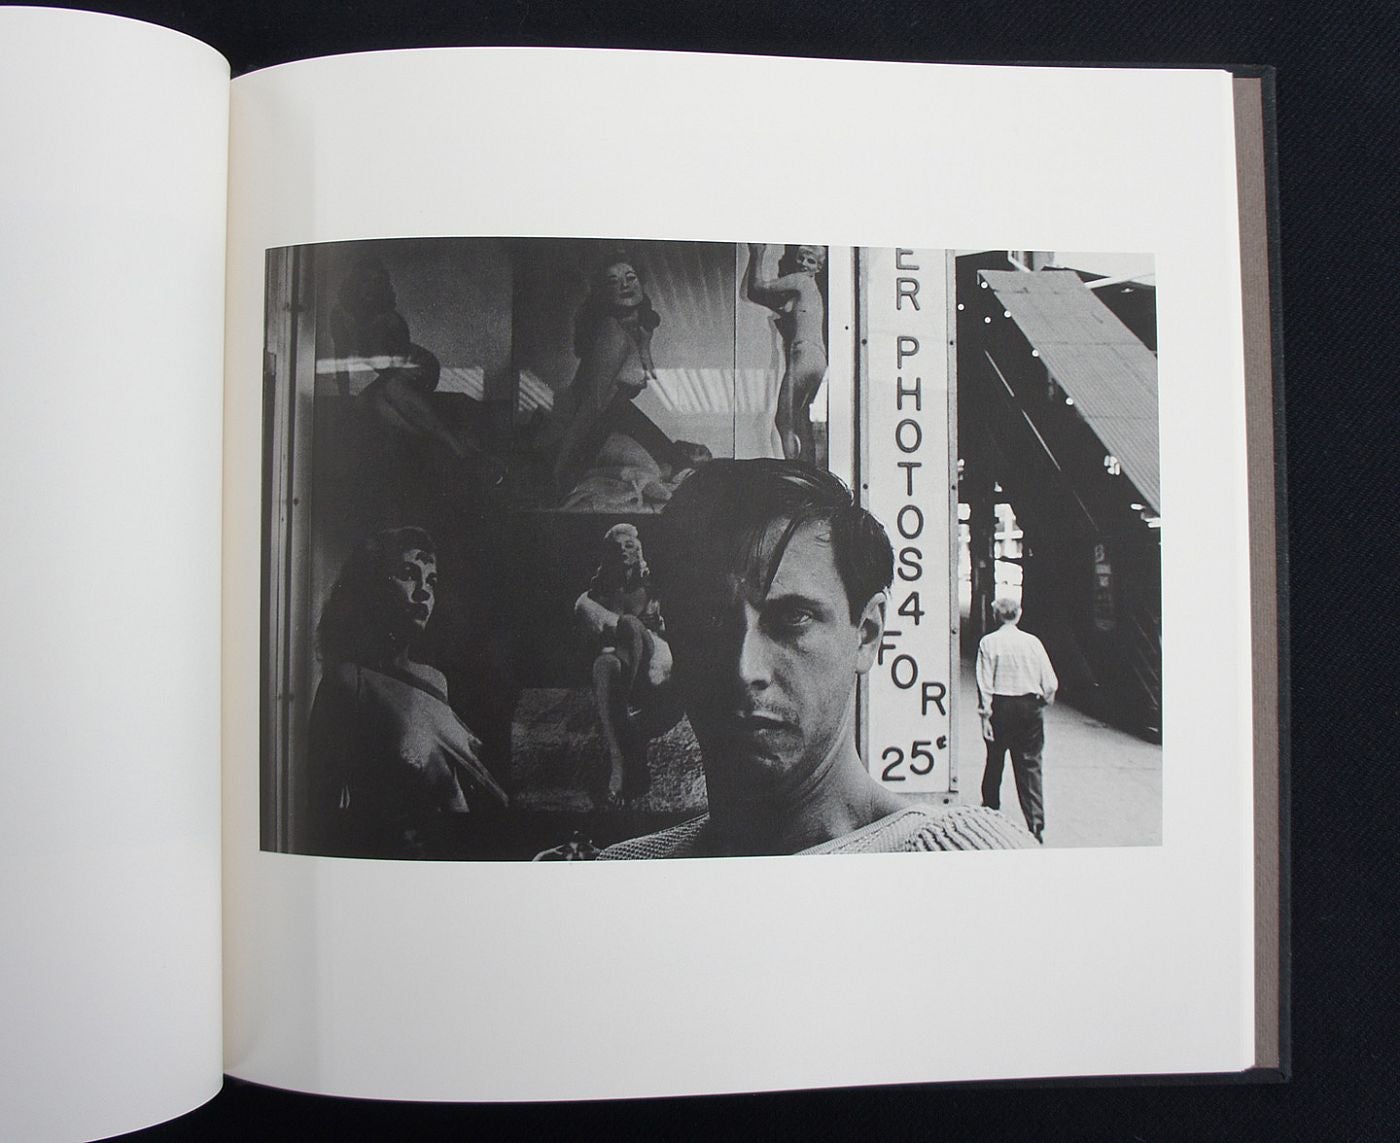 Self Portrait: Photographs by Lee Friedlander (Special Limited Edition with 2 Vintage Gelatin Silver Prints)